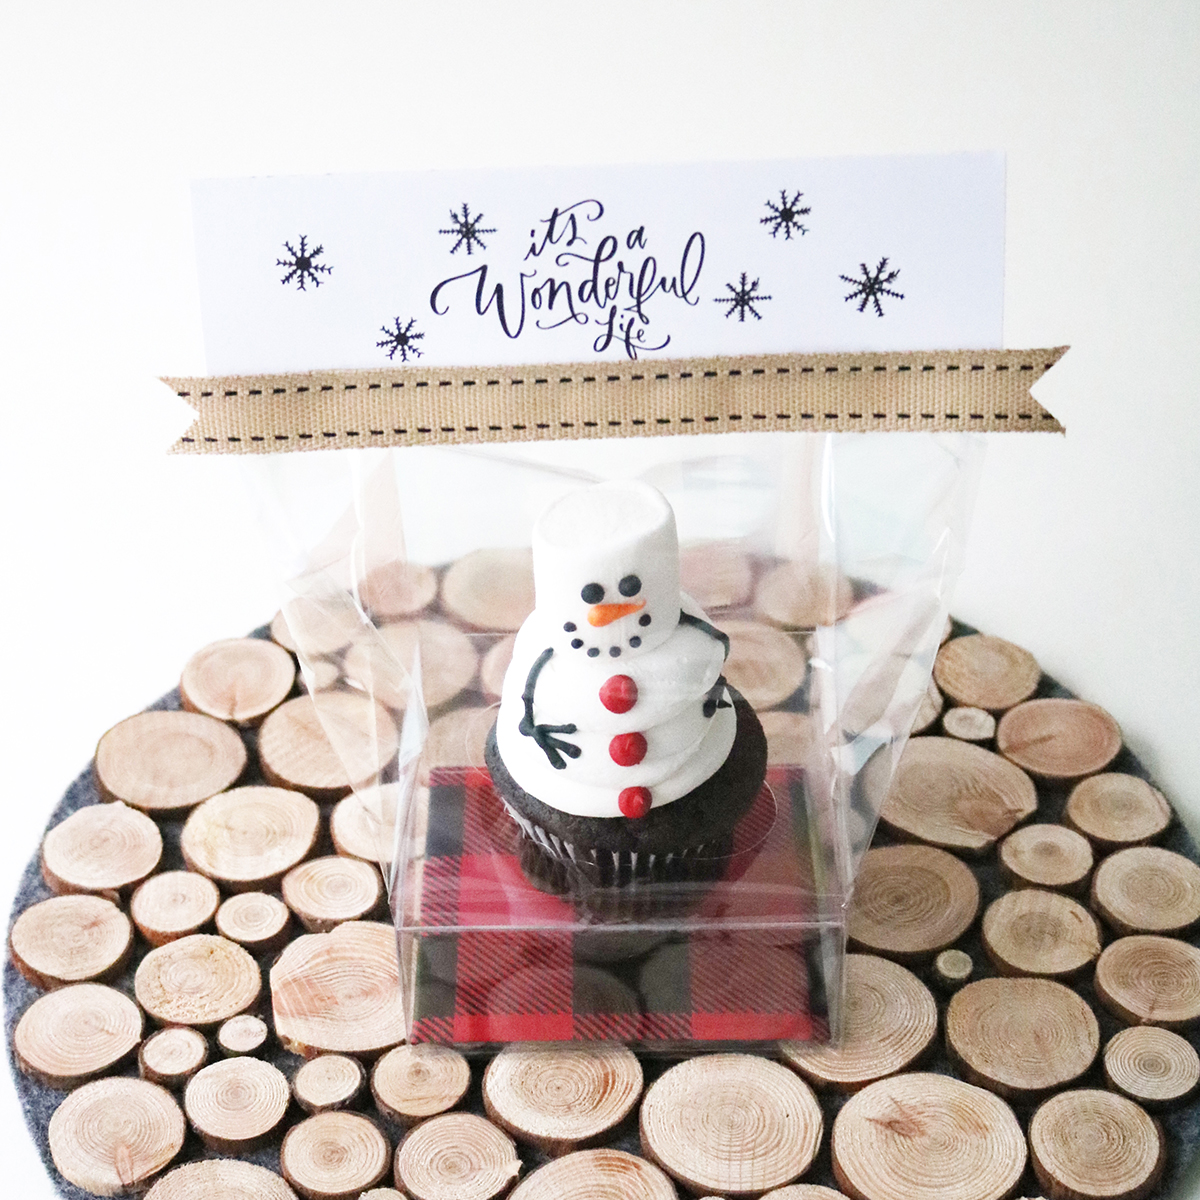 Snowman and Christmas tree cupcakes packaged for gift giving - free download for the gift topper printables | Creative Bag and Bake Sale Toronto